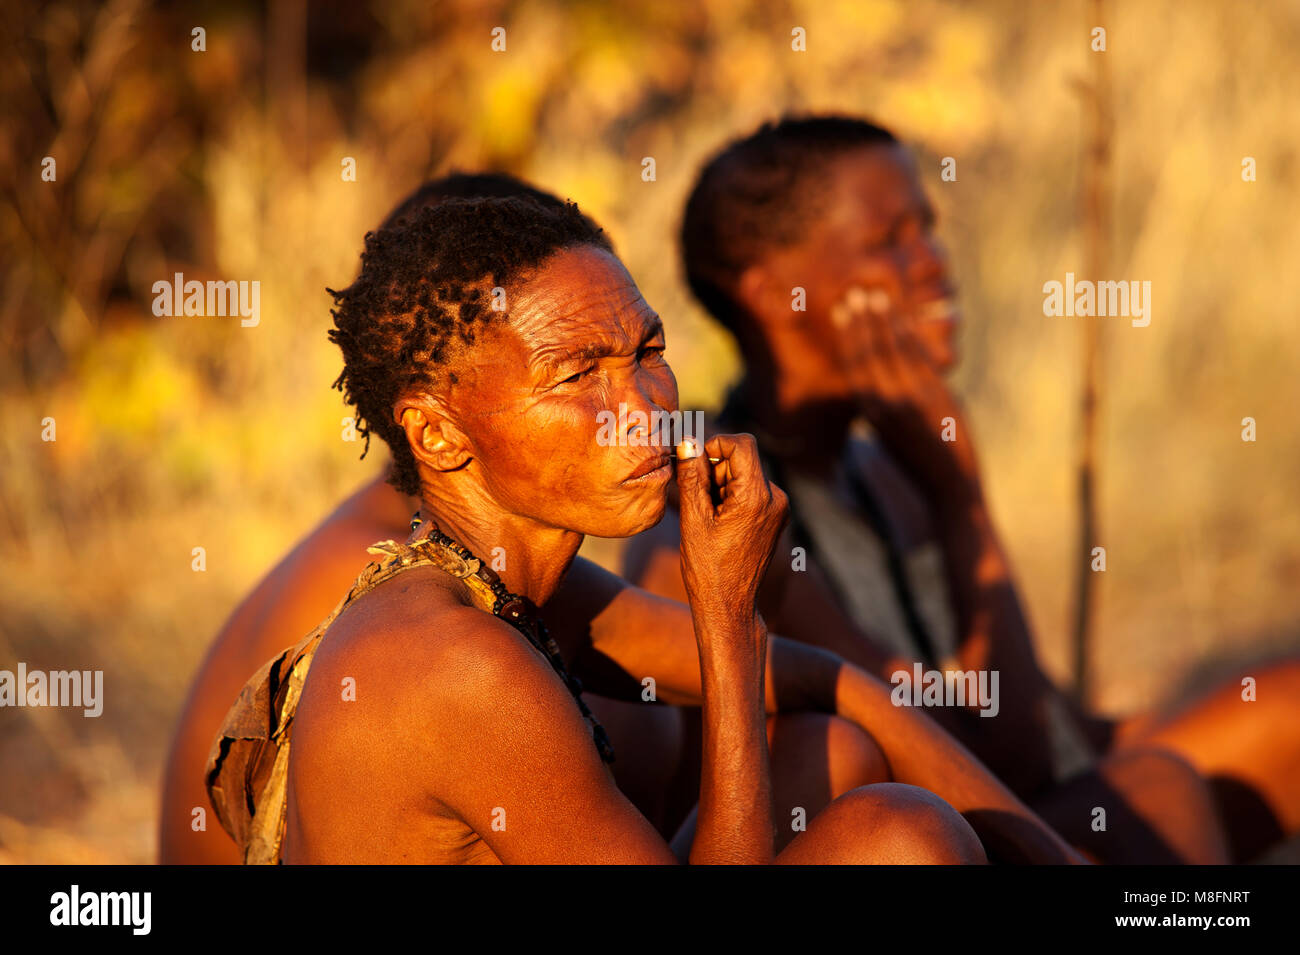 Ju Hoansi Or San Bushmen Hunters In The African Bush Many Tourists Came To Visit Then In The